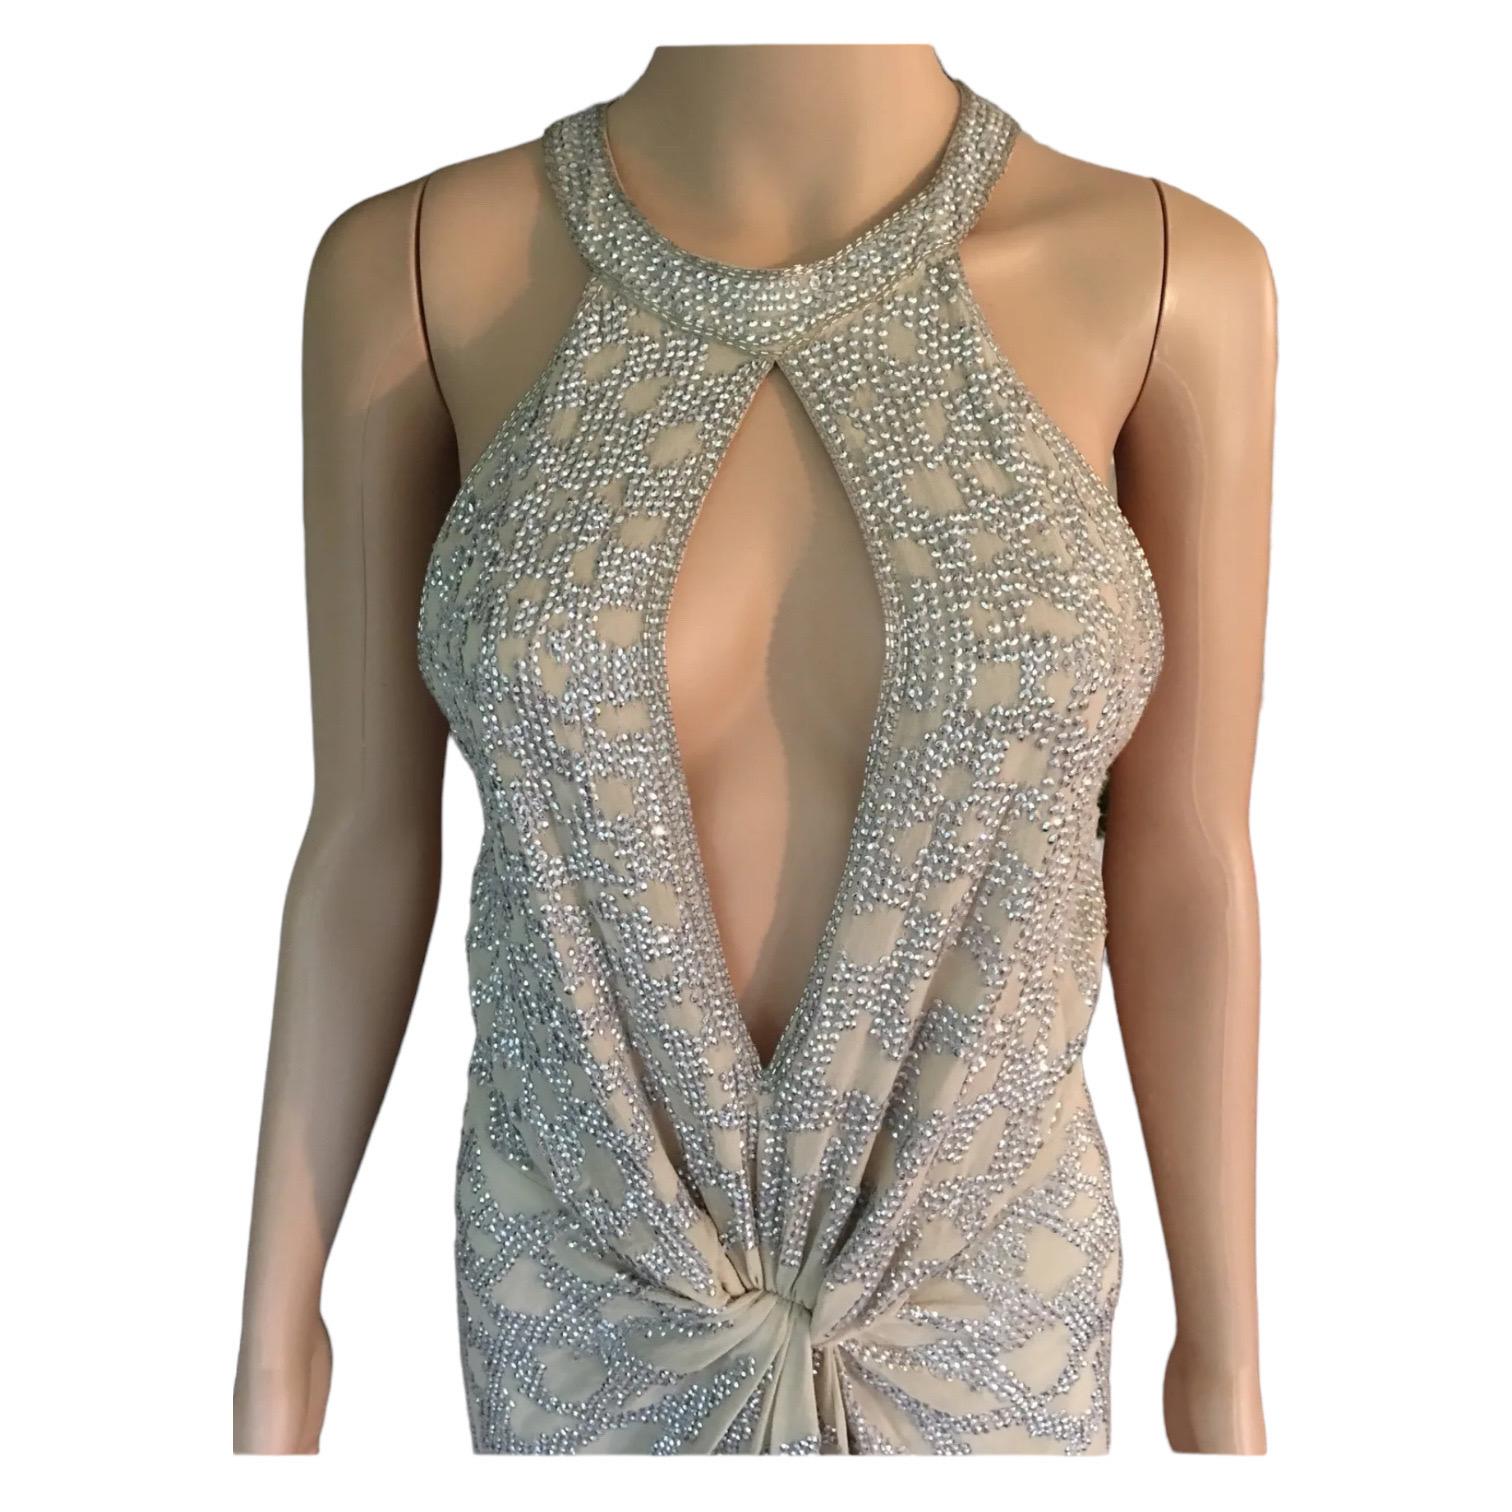 Roberto Cavalli c. 2007 Plunging Nekcline Keyhole Embellished Dress In Good Condition For Sale In Naples, FL